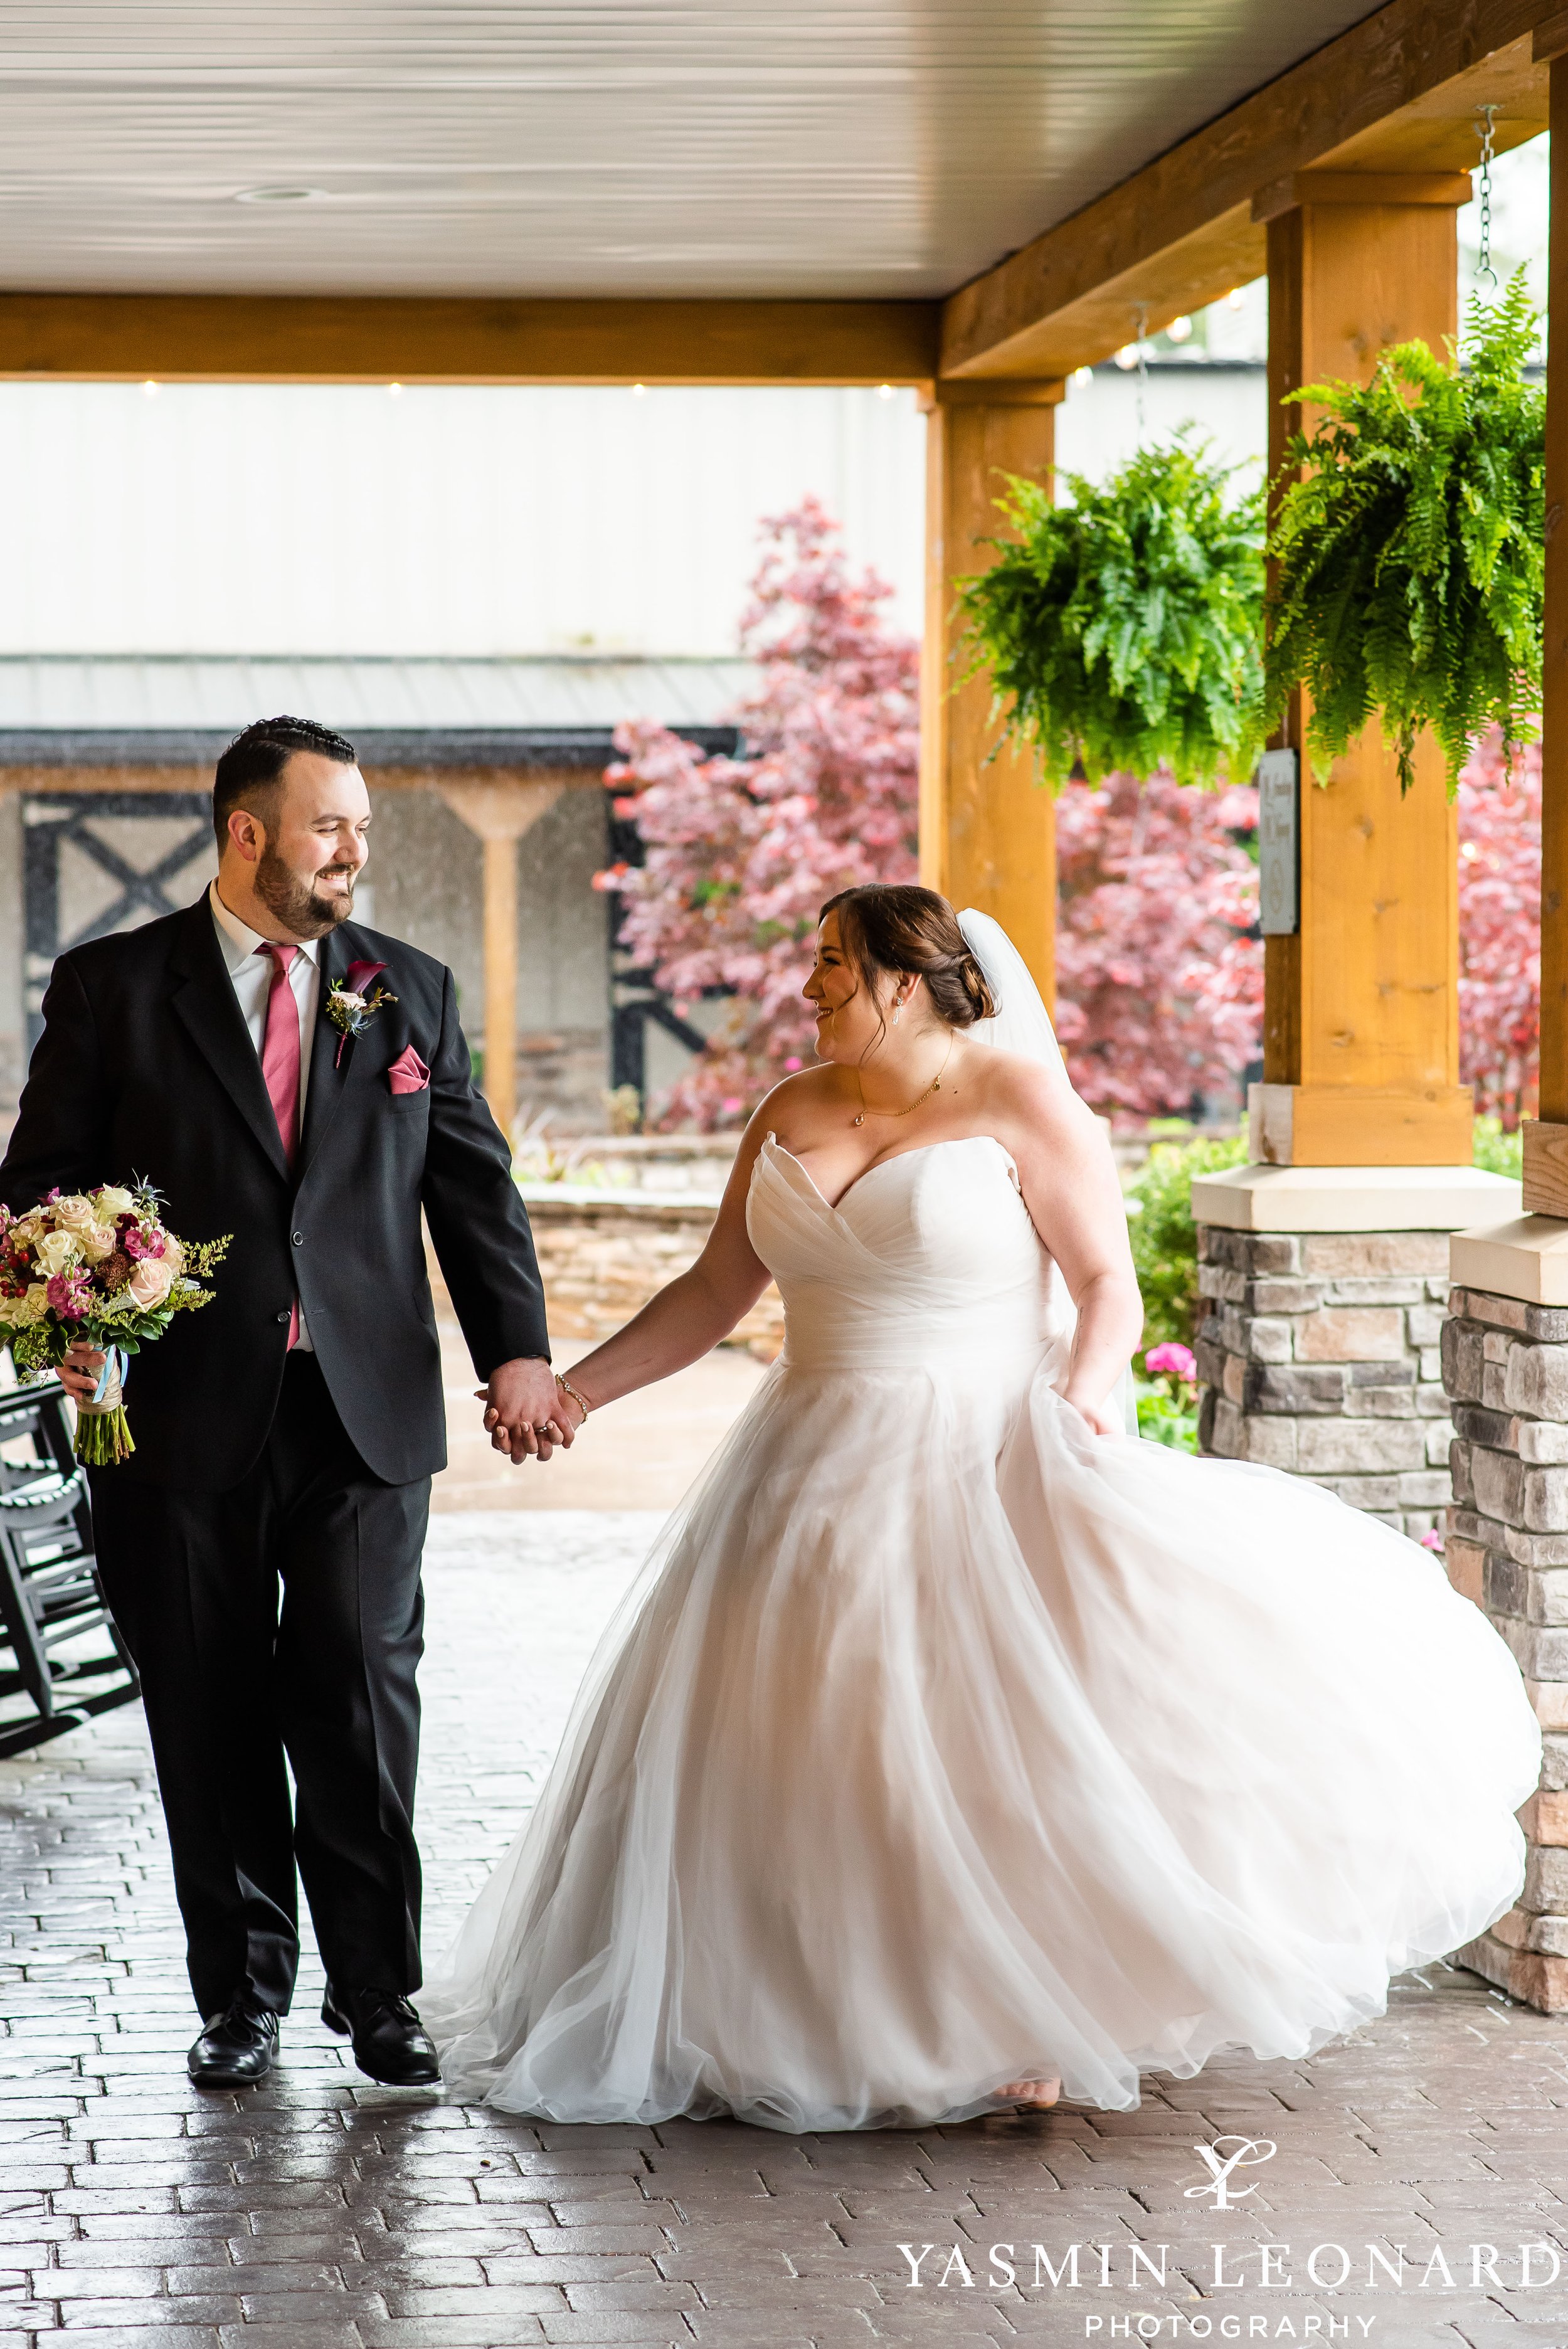 Legacy Stables and Events - Legacy Stables Wedding - Morgan and Logan - NC Weddings - Marry Me NC - Triad Weddings - Best Wedding Photographer Near Me - Best Photographer in High Point - Yasmin Leonard Photography-25.jpg